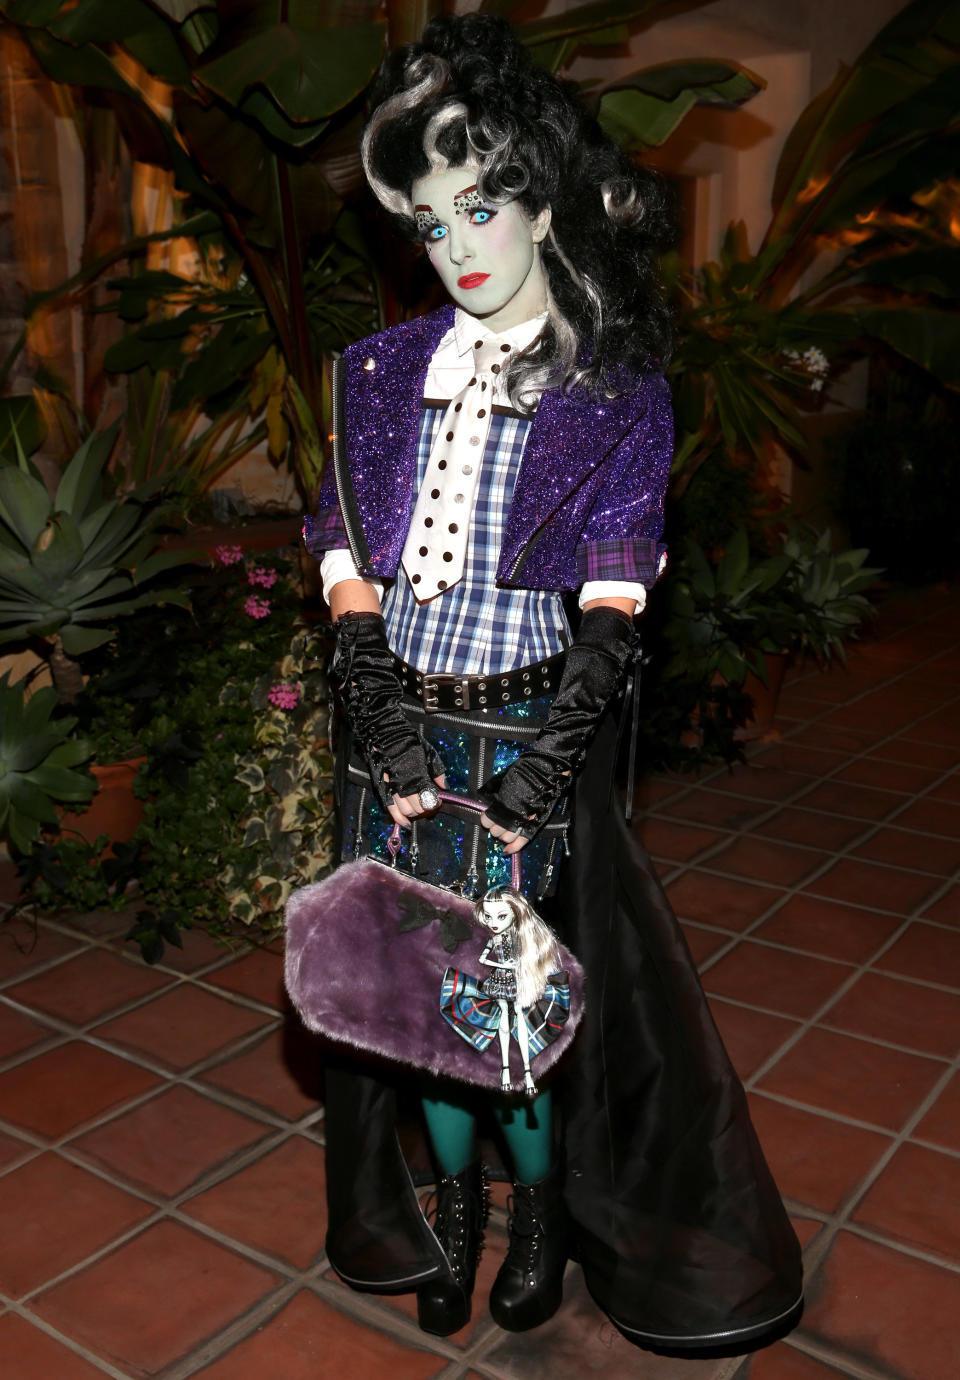 LOS ANGELES, CA - OCTOBER 28:  90210 starlet, Shenae Grimes, dressed as Monster High's Frankie Stein, leaves for Matthew Morrison's 3rd Annual Halloween Party on October 28, 2012 in Los Angeles, California.  (Photo by Christopher Polk/Getty Images for Mattel)